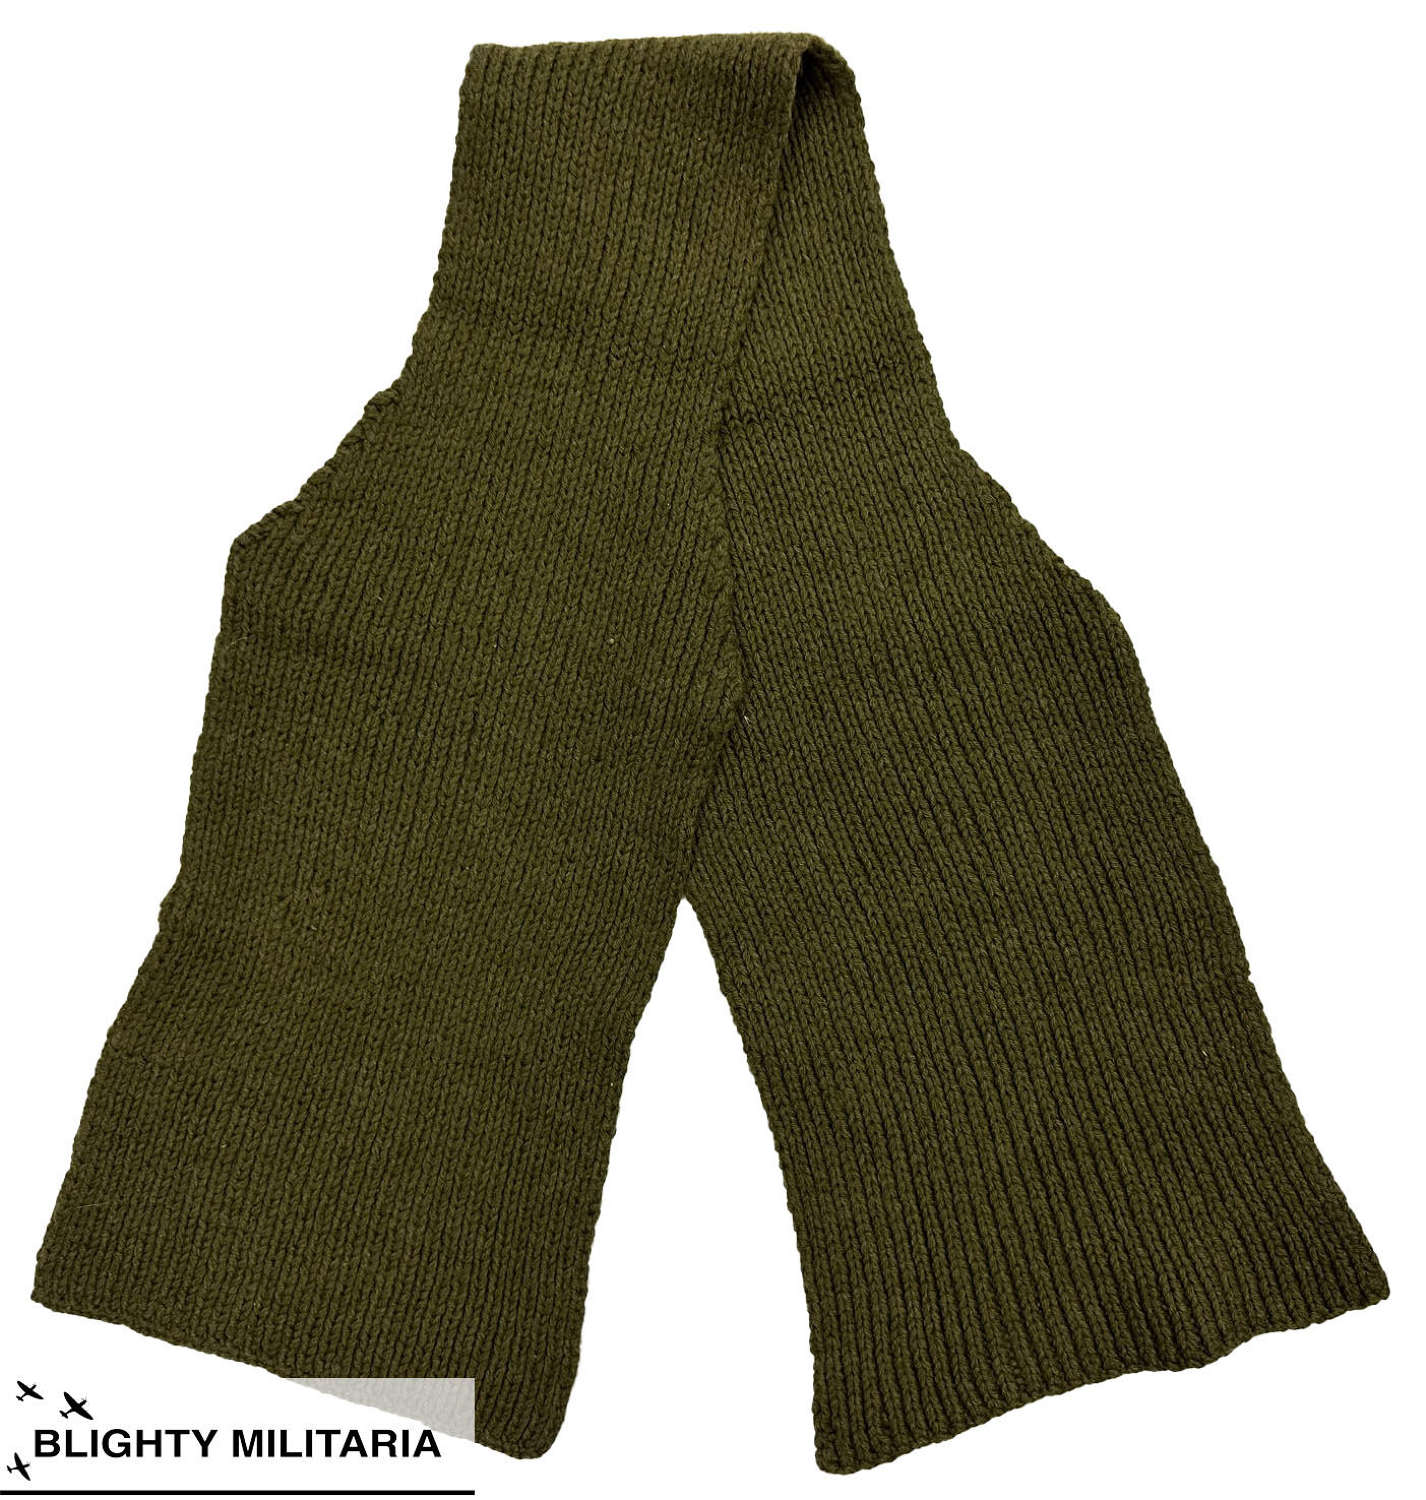 Original WW2 British Army Officer's Knitted Wool Scarf